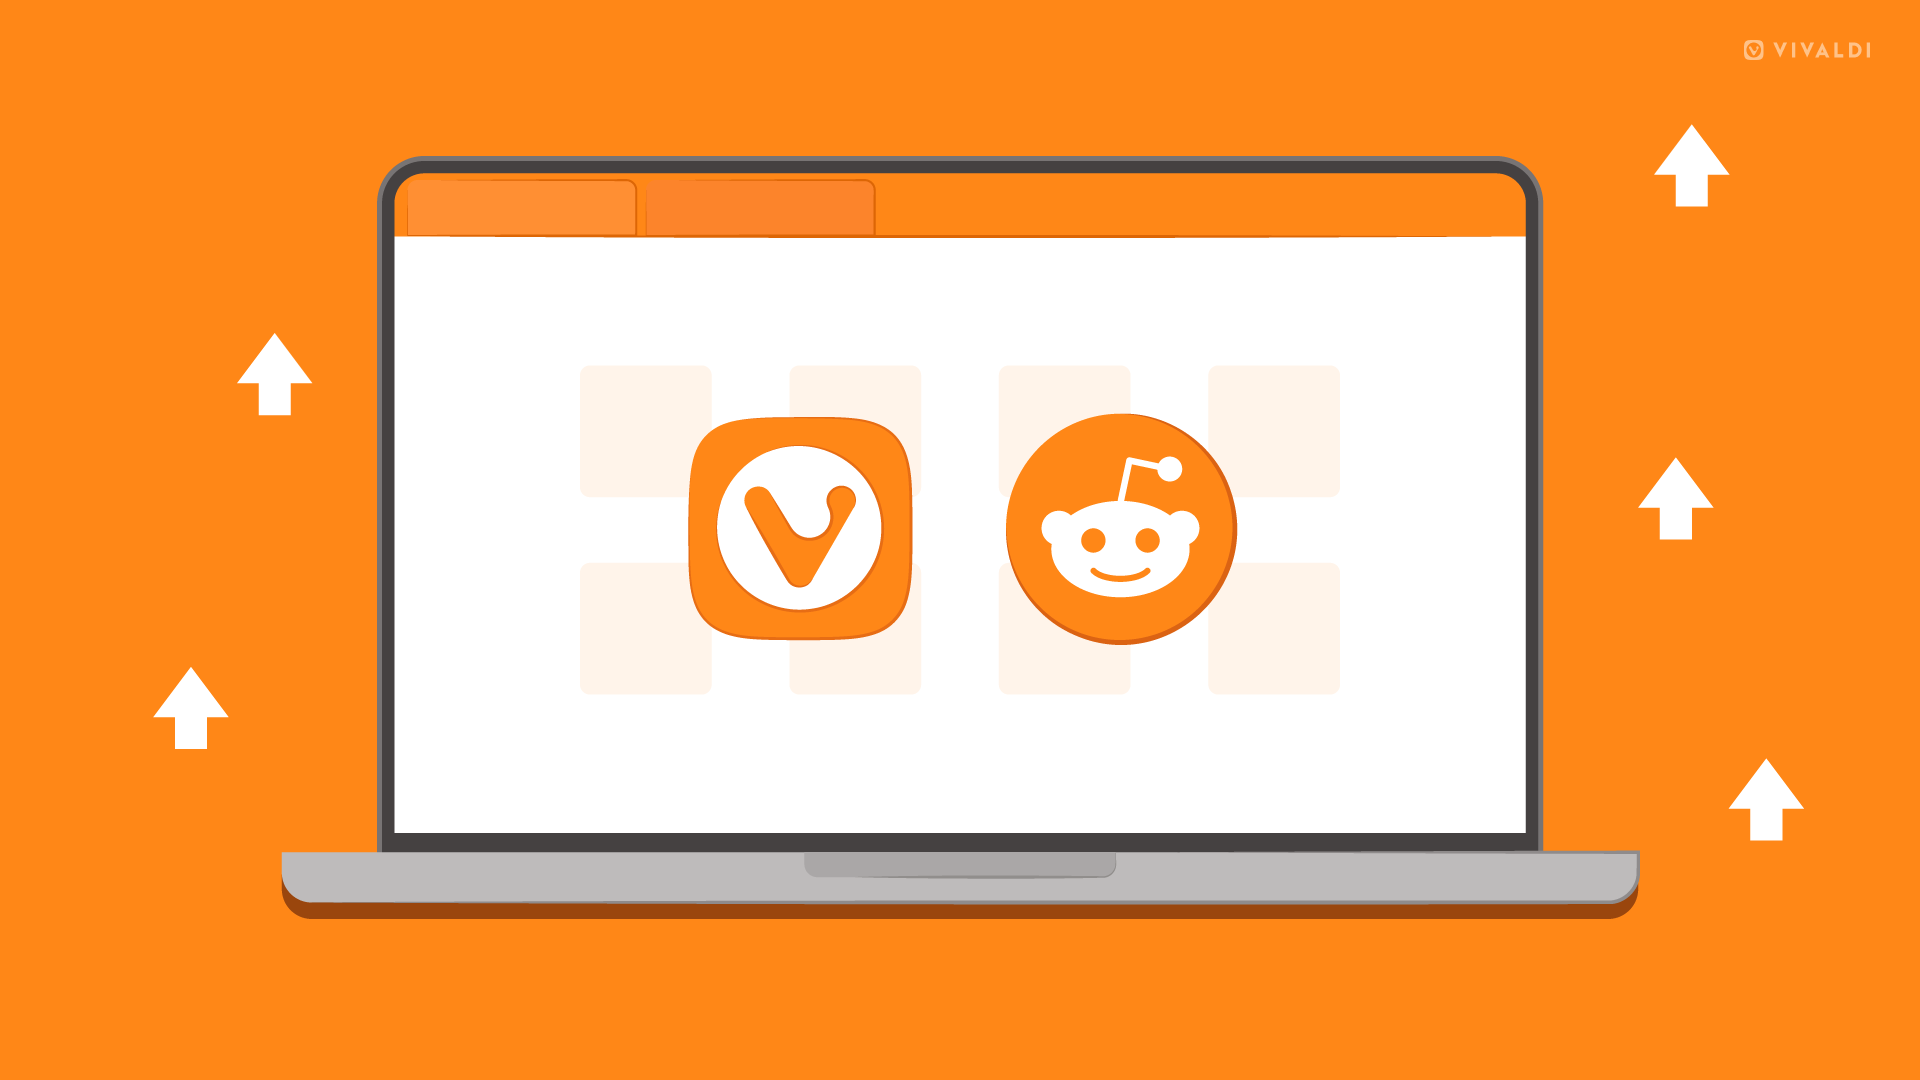 Illustration of a laptop with the logos of Vivaldi browser and Reddit against an orange and off white background.